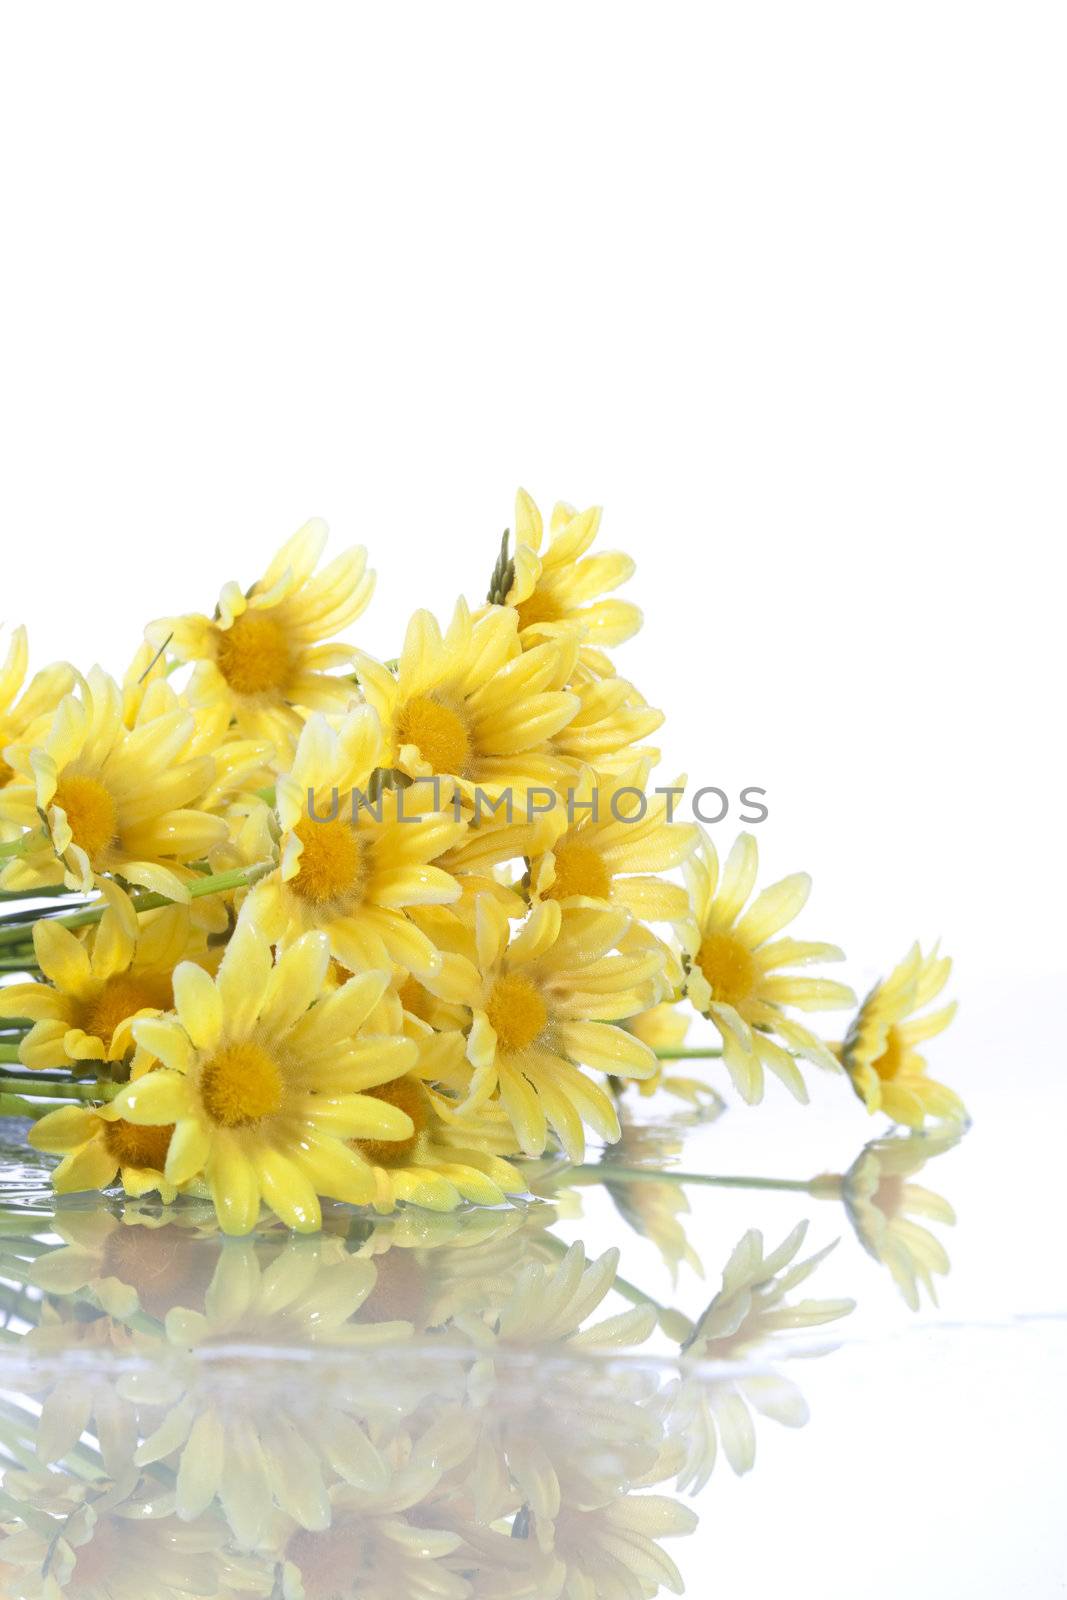 yellow daisys isolated on white background - shallow dof for extra dynamism.